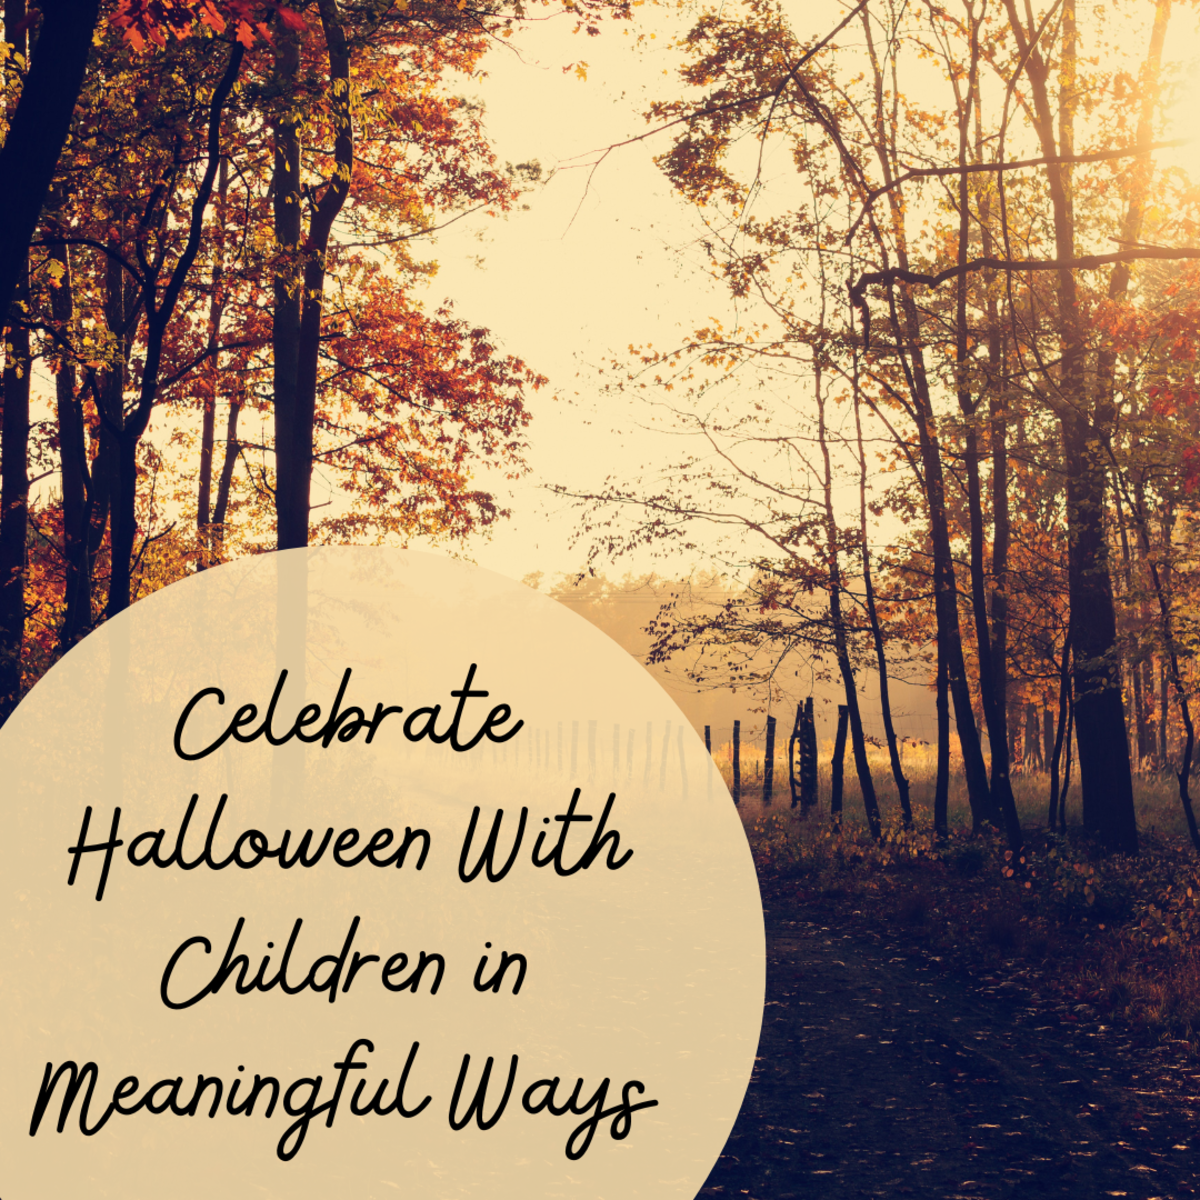 Halloween occurs at a very beautiful and meaningful time of year. Slowing down can help you and your family honor it.